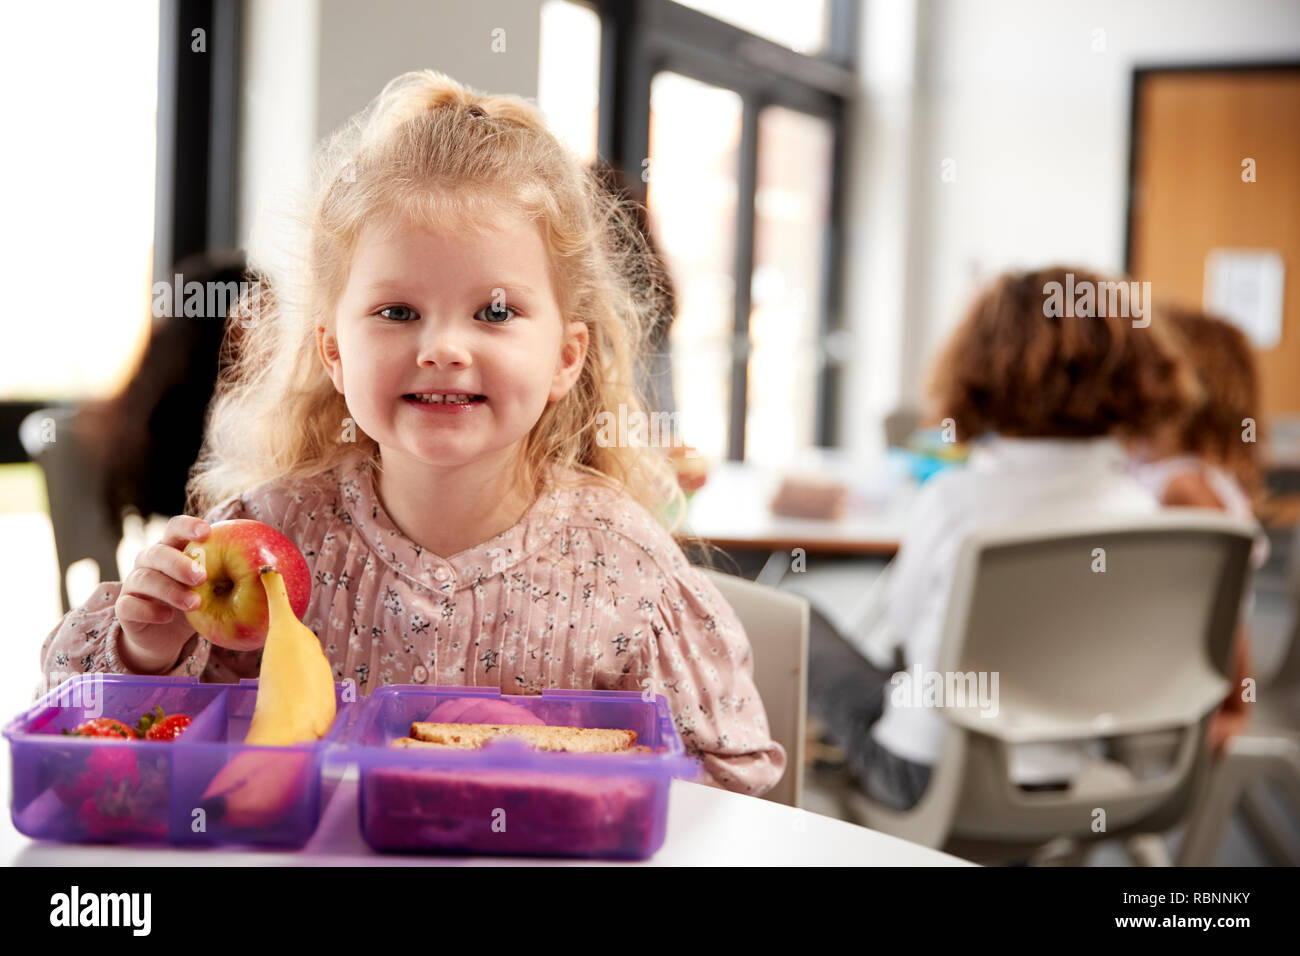 Young white schoolgirl sitting at a table smiling and holding an apple in a kindergarten classroom during her lunch break, close up Stock Photo